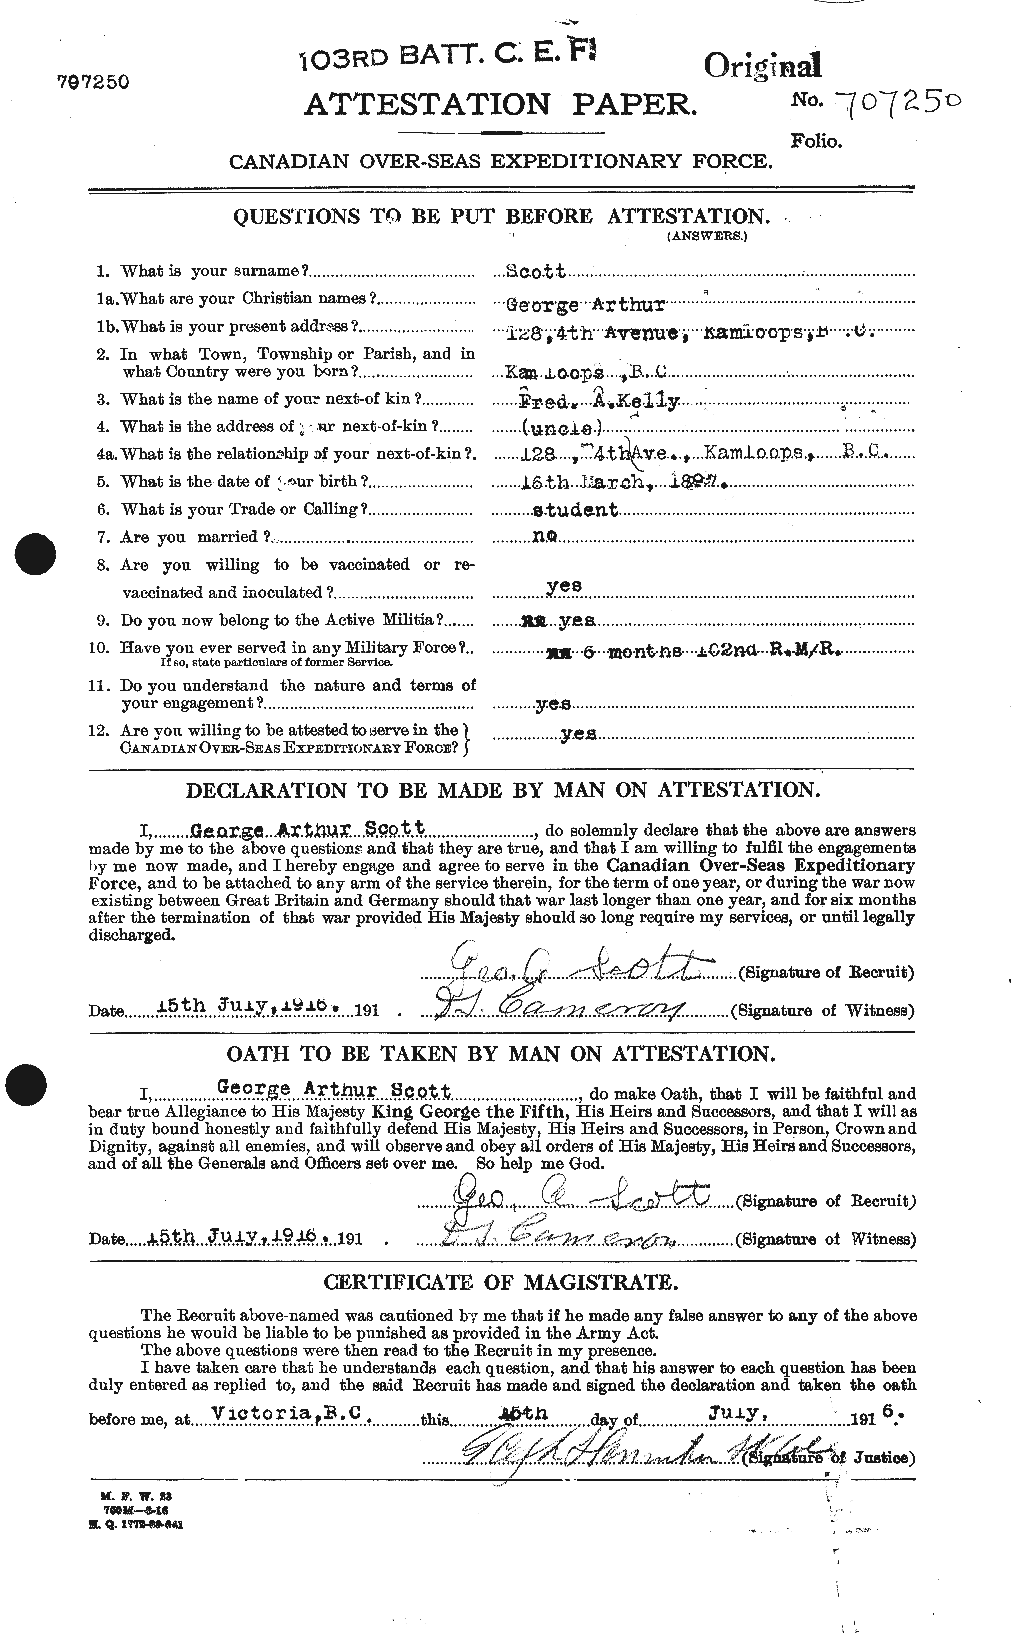 Personnel Records of the First World War - CEF 083573a